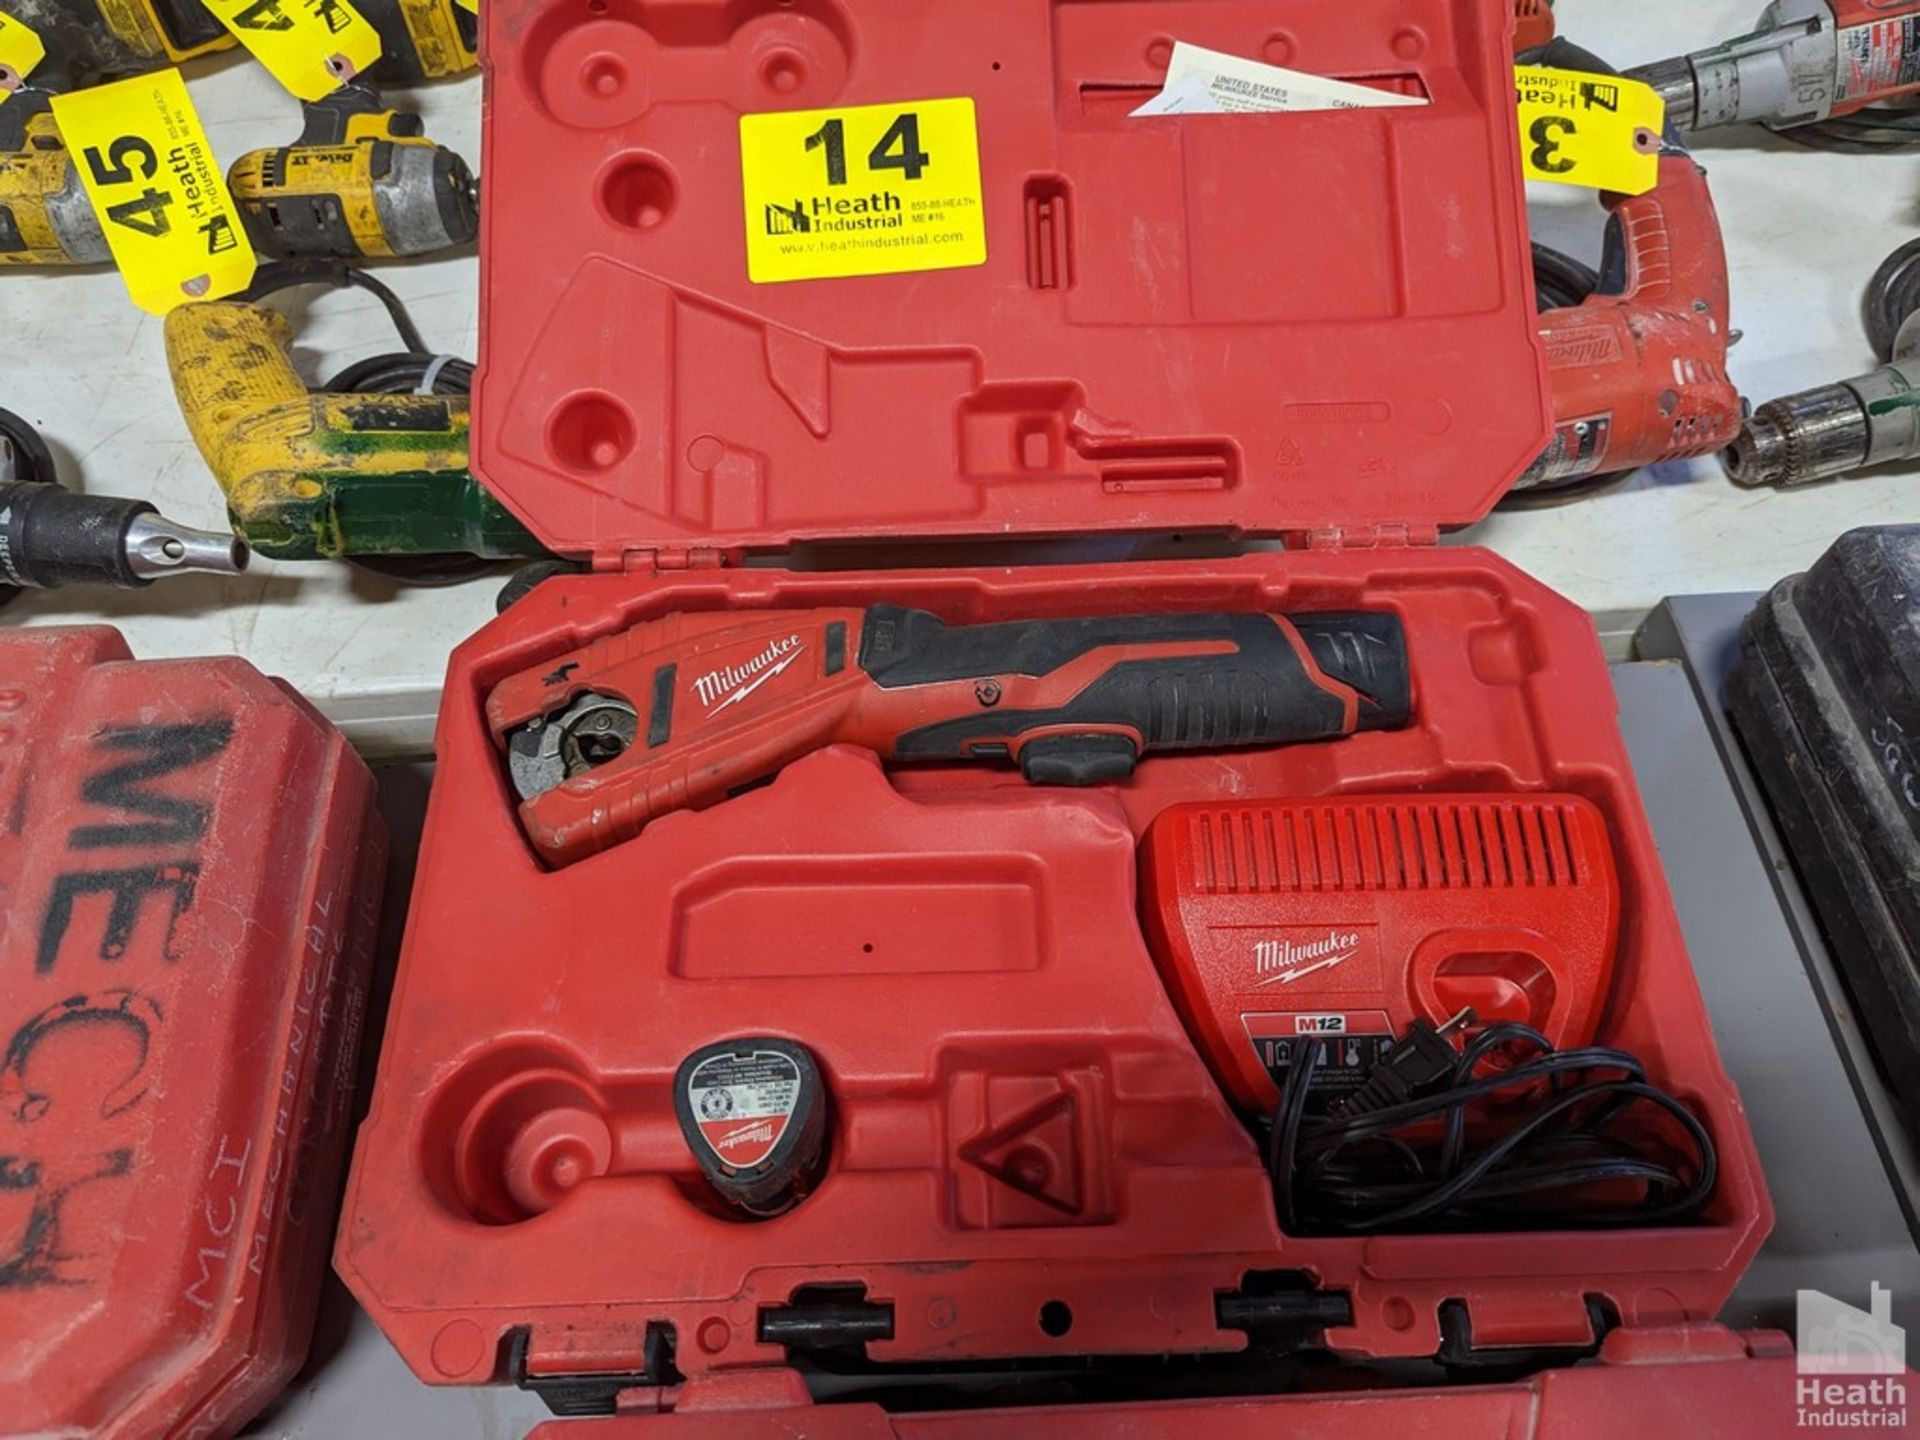 MILWAUKEE NO. 2471-20 M12 CORDLESS TUBING CUTTER, (2) BATTERIES, CHARGER, CASE